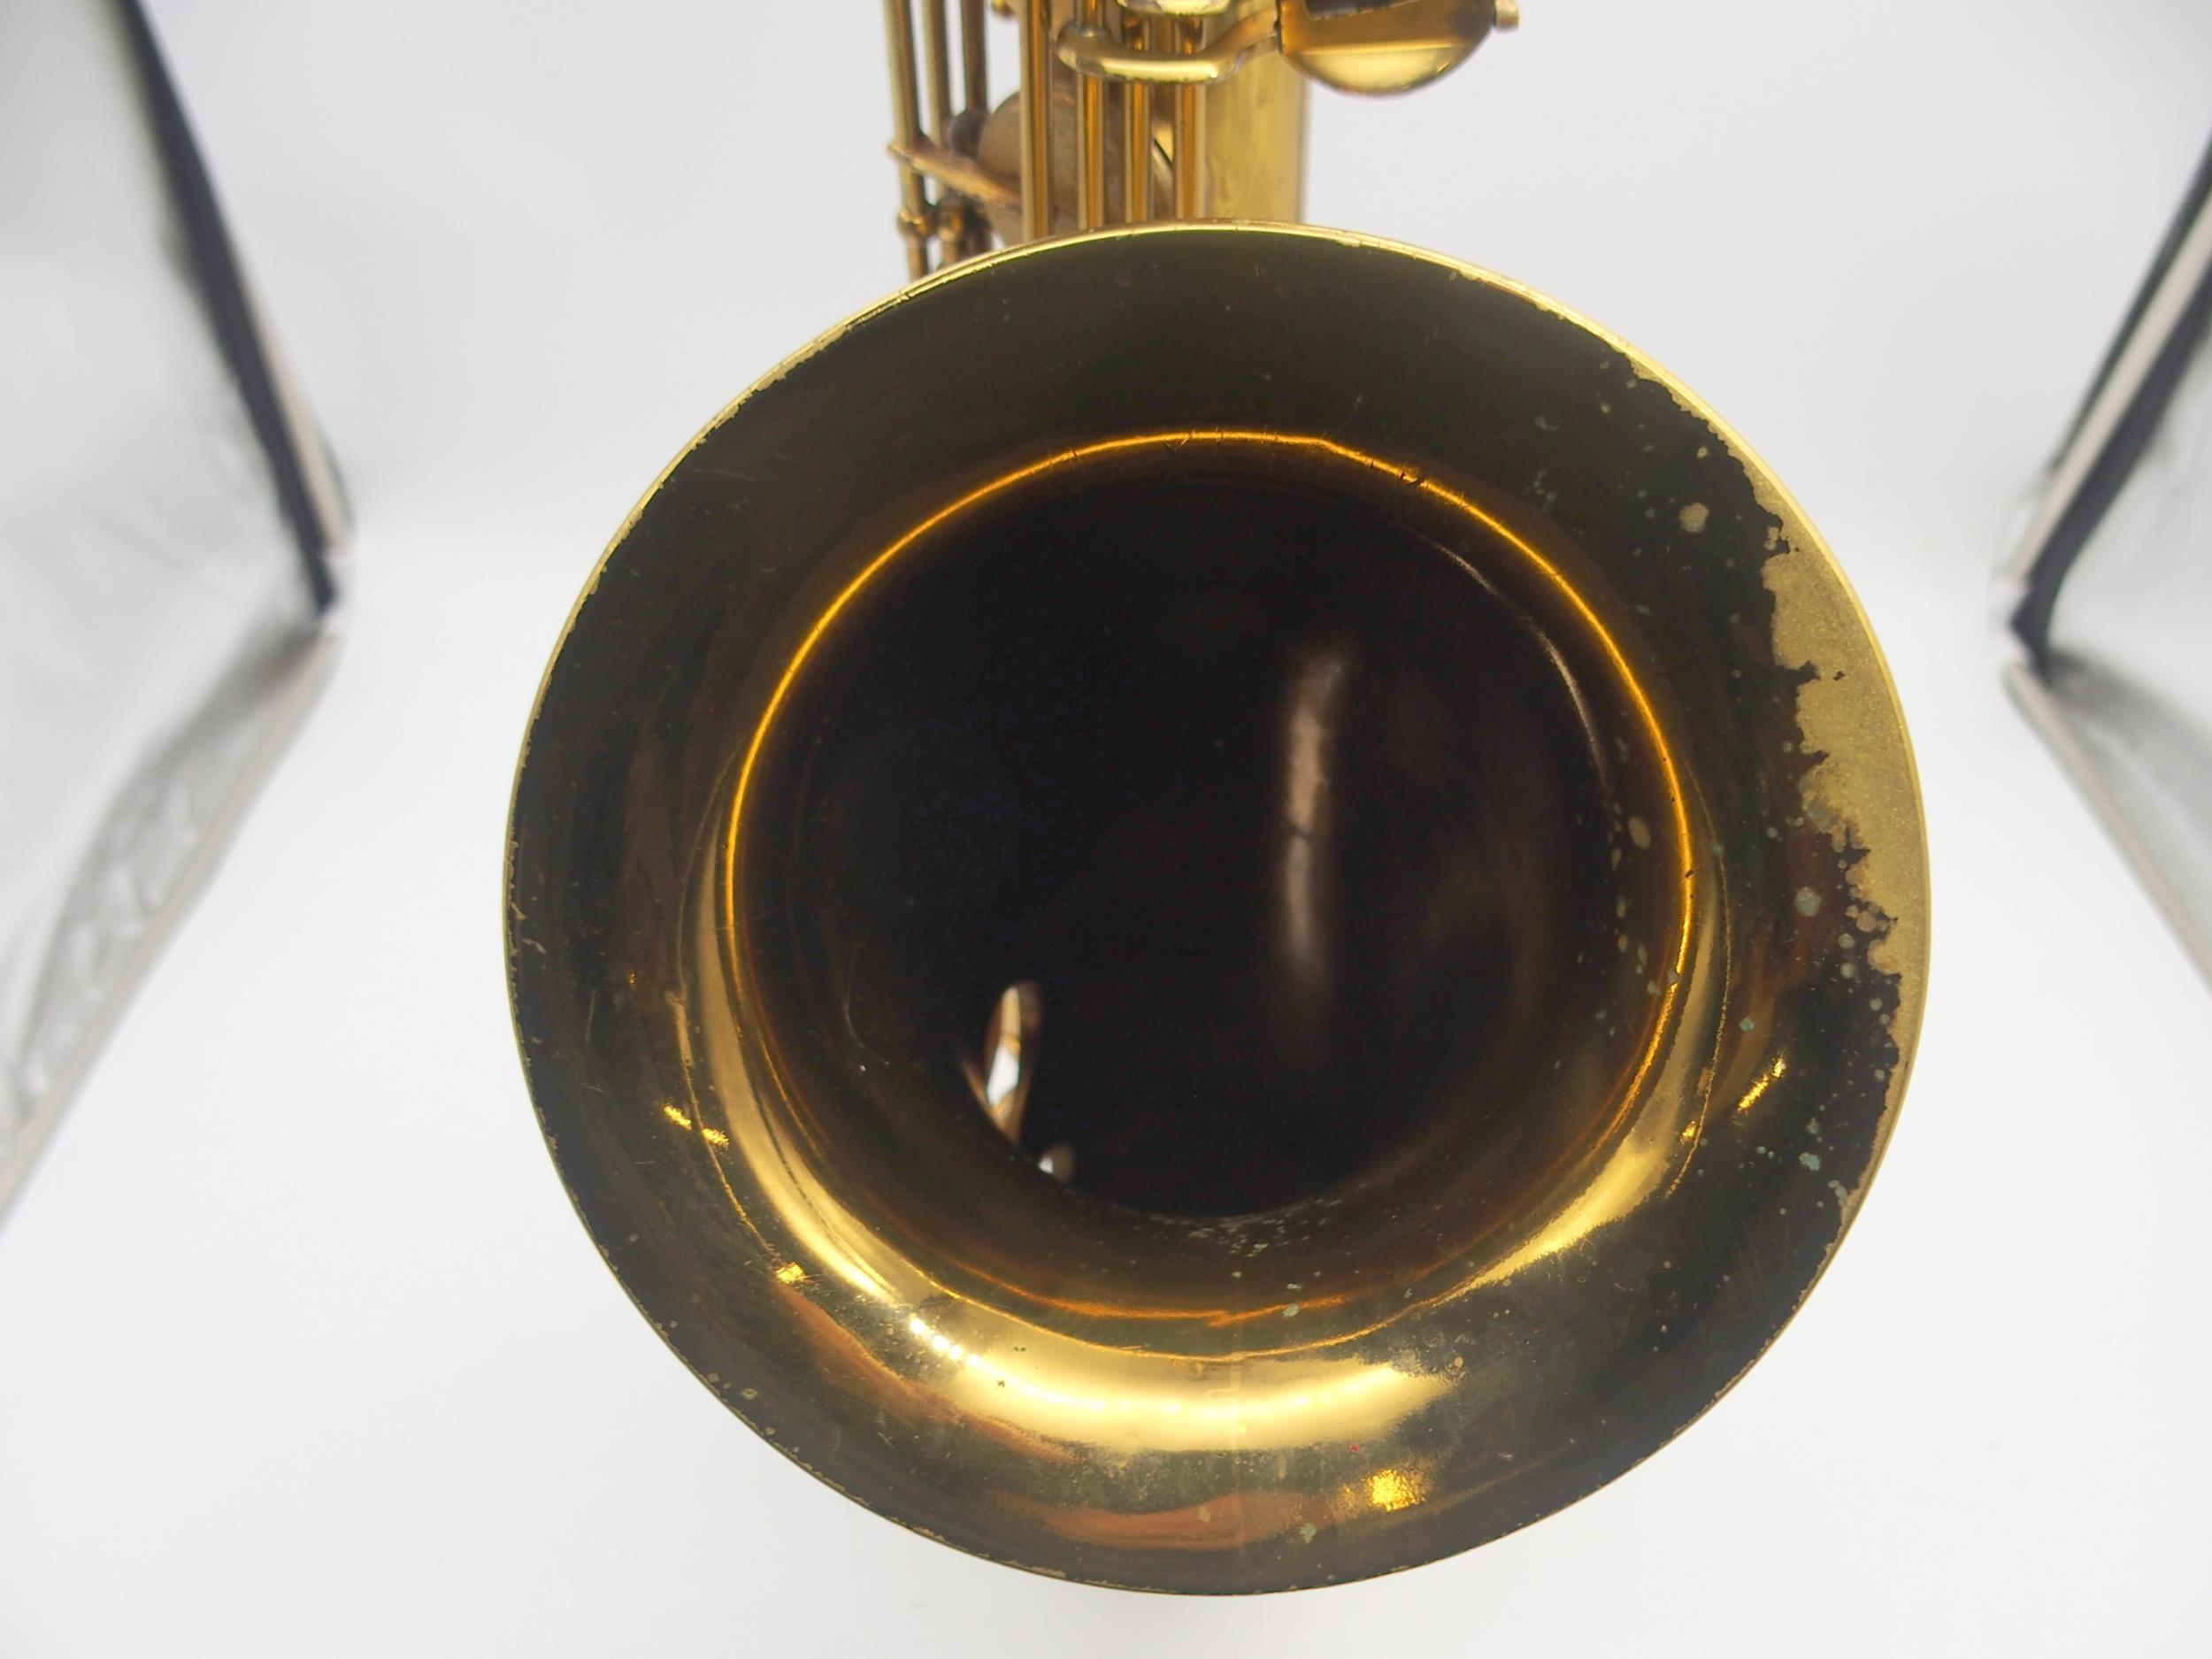 **WITHDRAWN** Pennsylvania Special Baritone Saxophone serial number 261180 engraved "Pensyl - Image 28 of 33